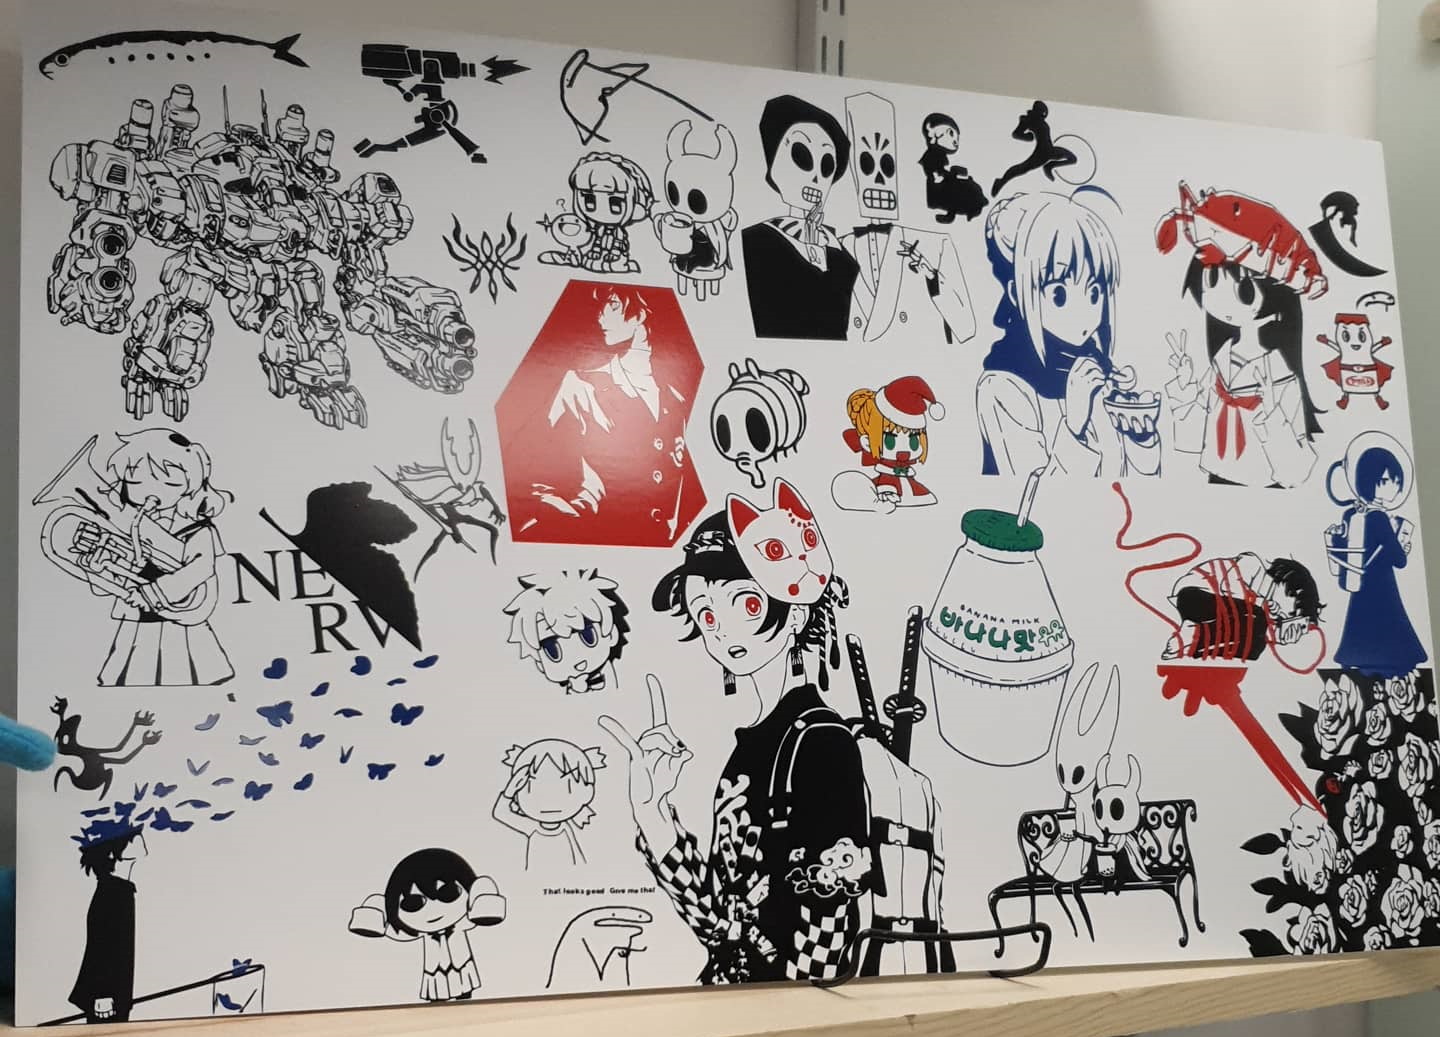 Sticker board I made a while back. I thought it was cool!